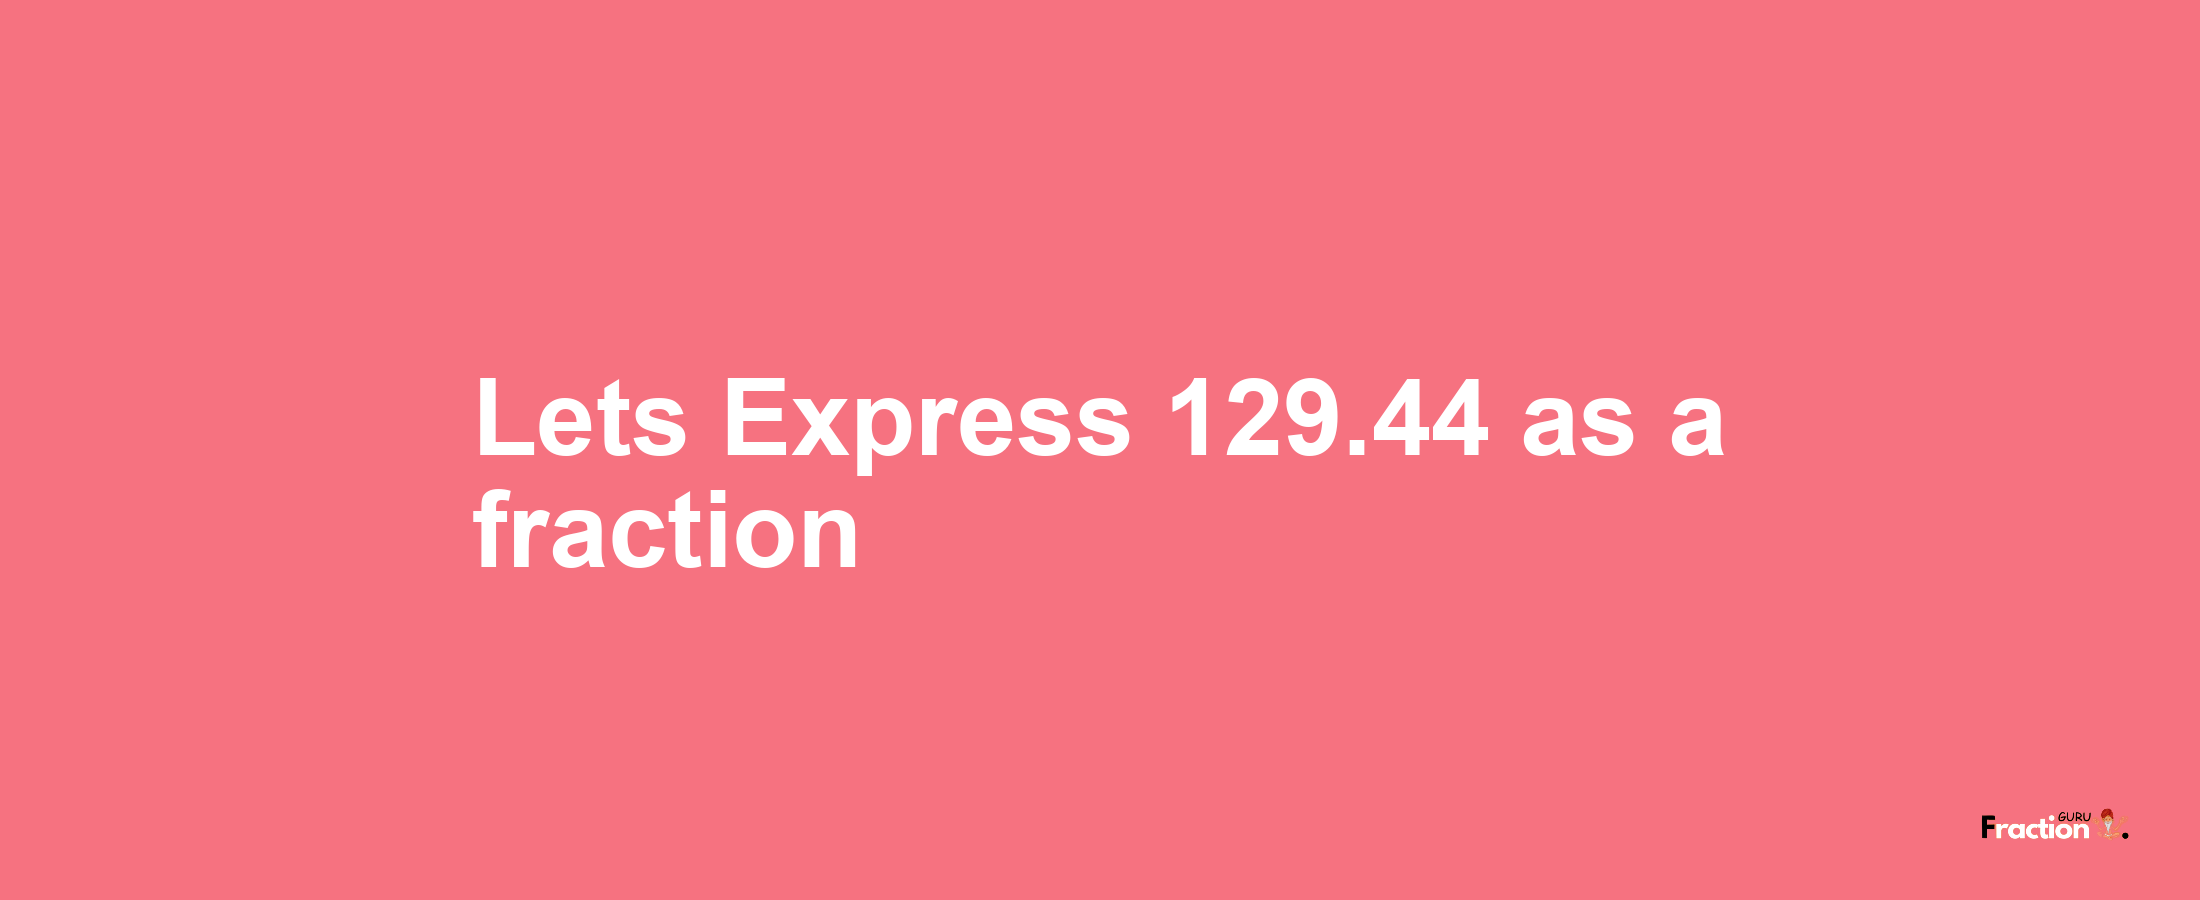 Lets Express 129.44 as afraction